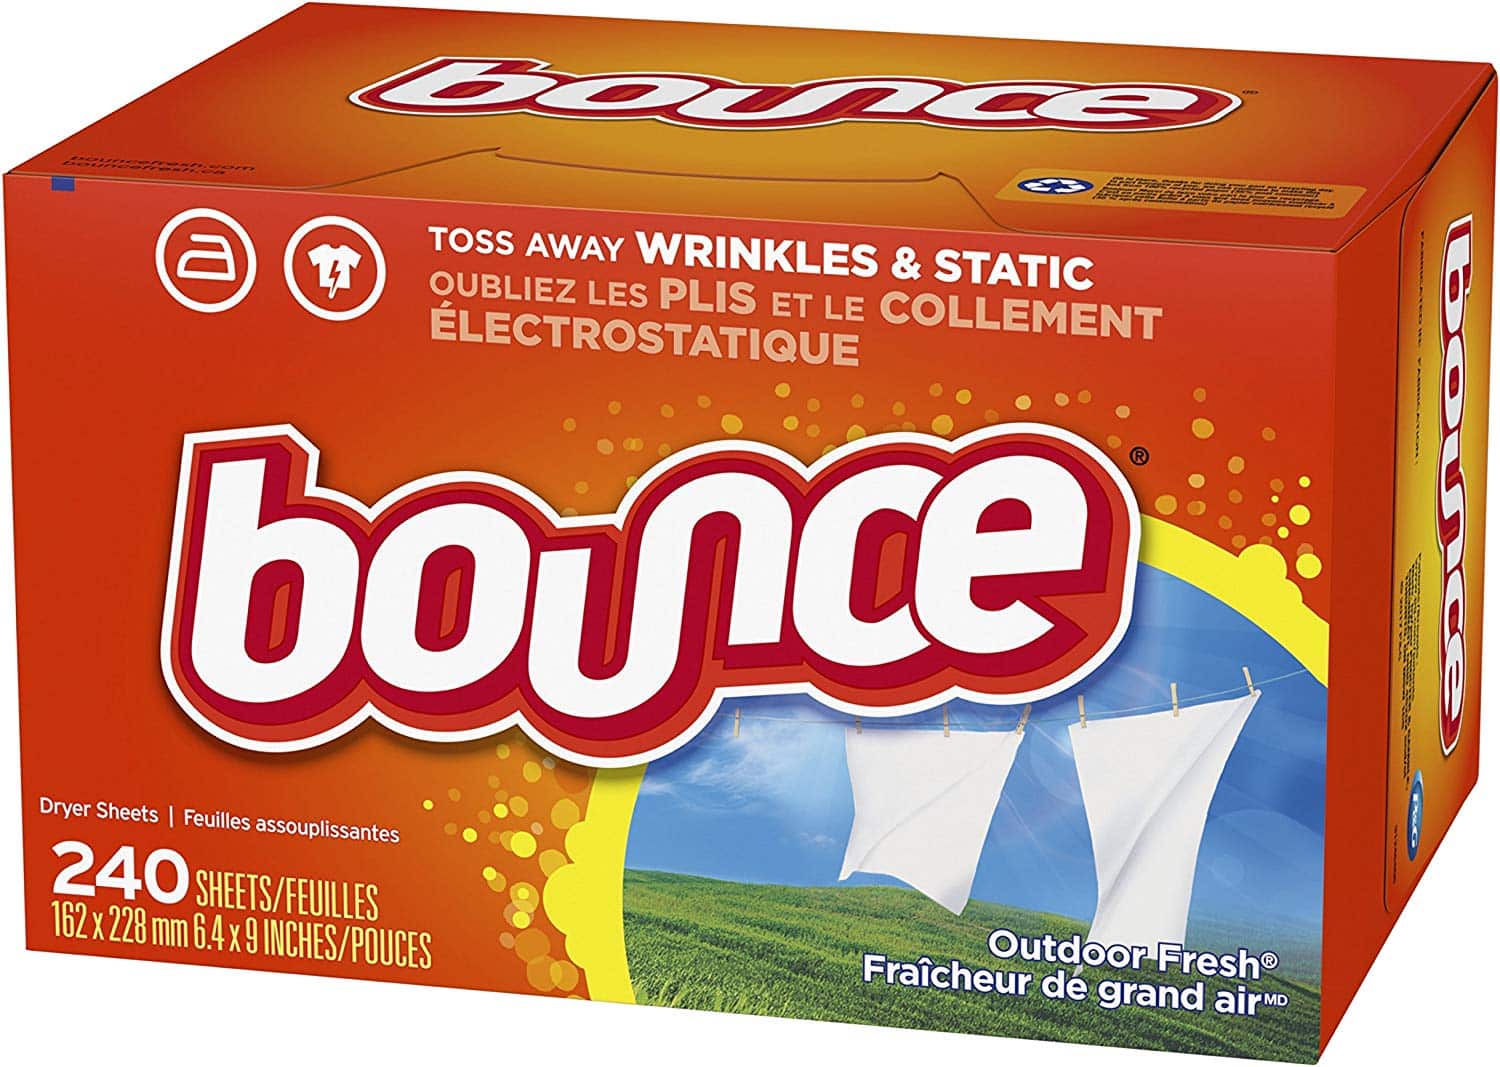 Bounce Fabric Softener and Dryer Sheets, Outdoor Fresh, 240 Count $5.83 (REG $12.56)